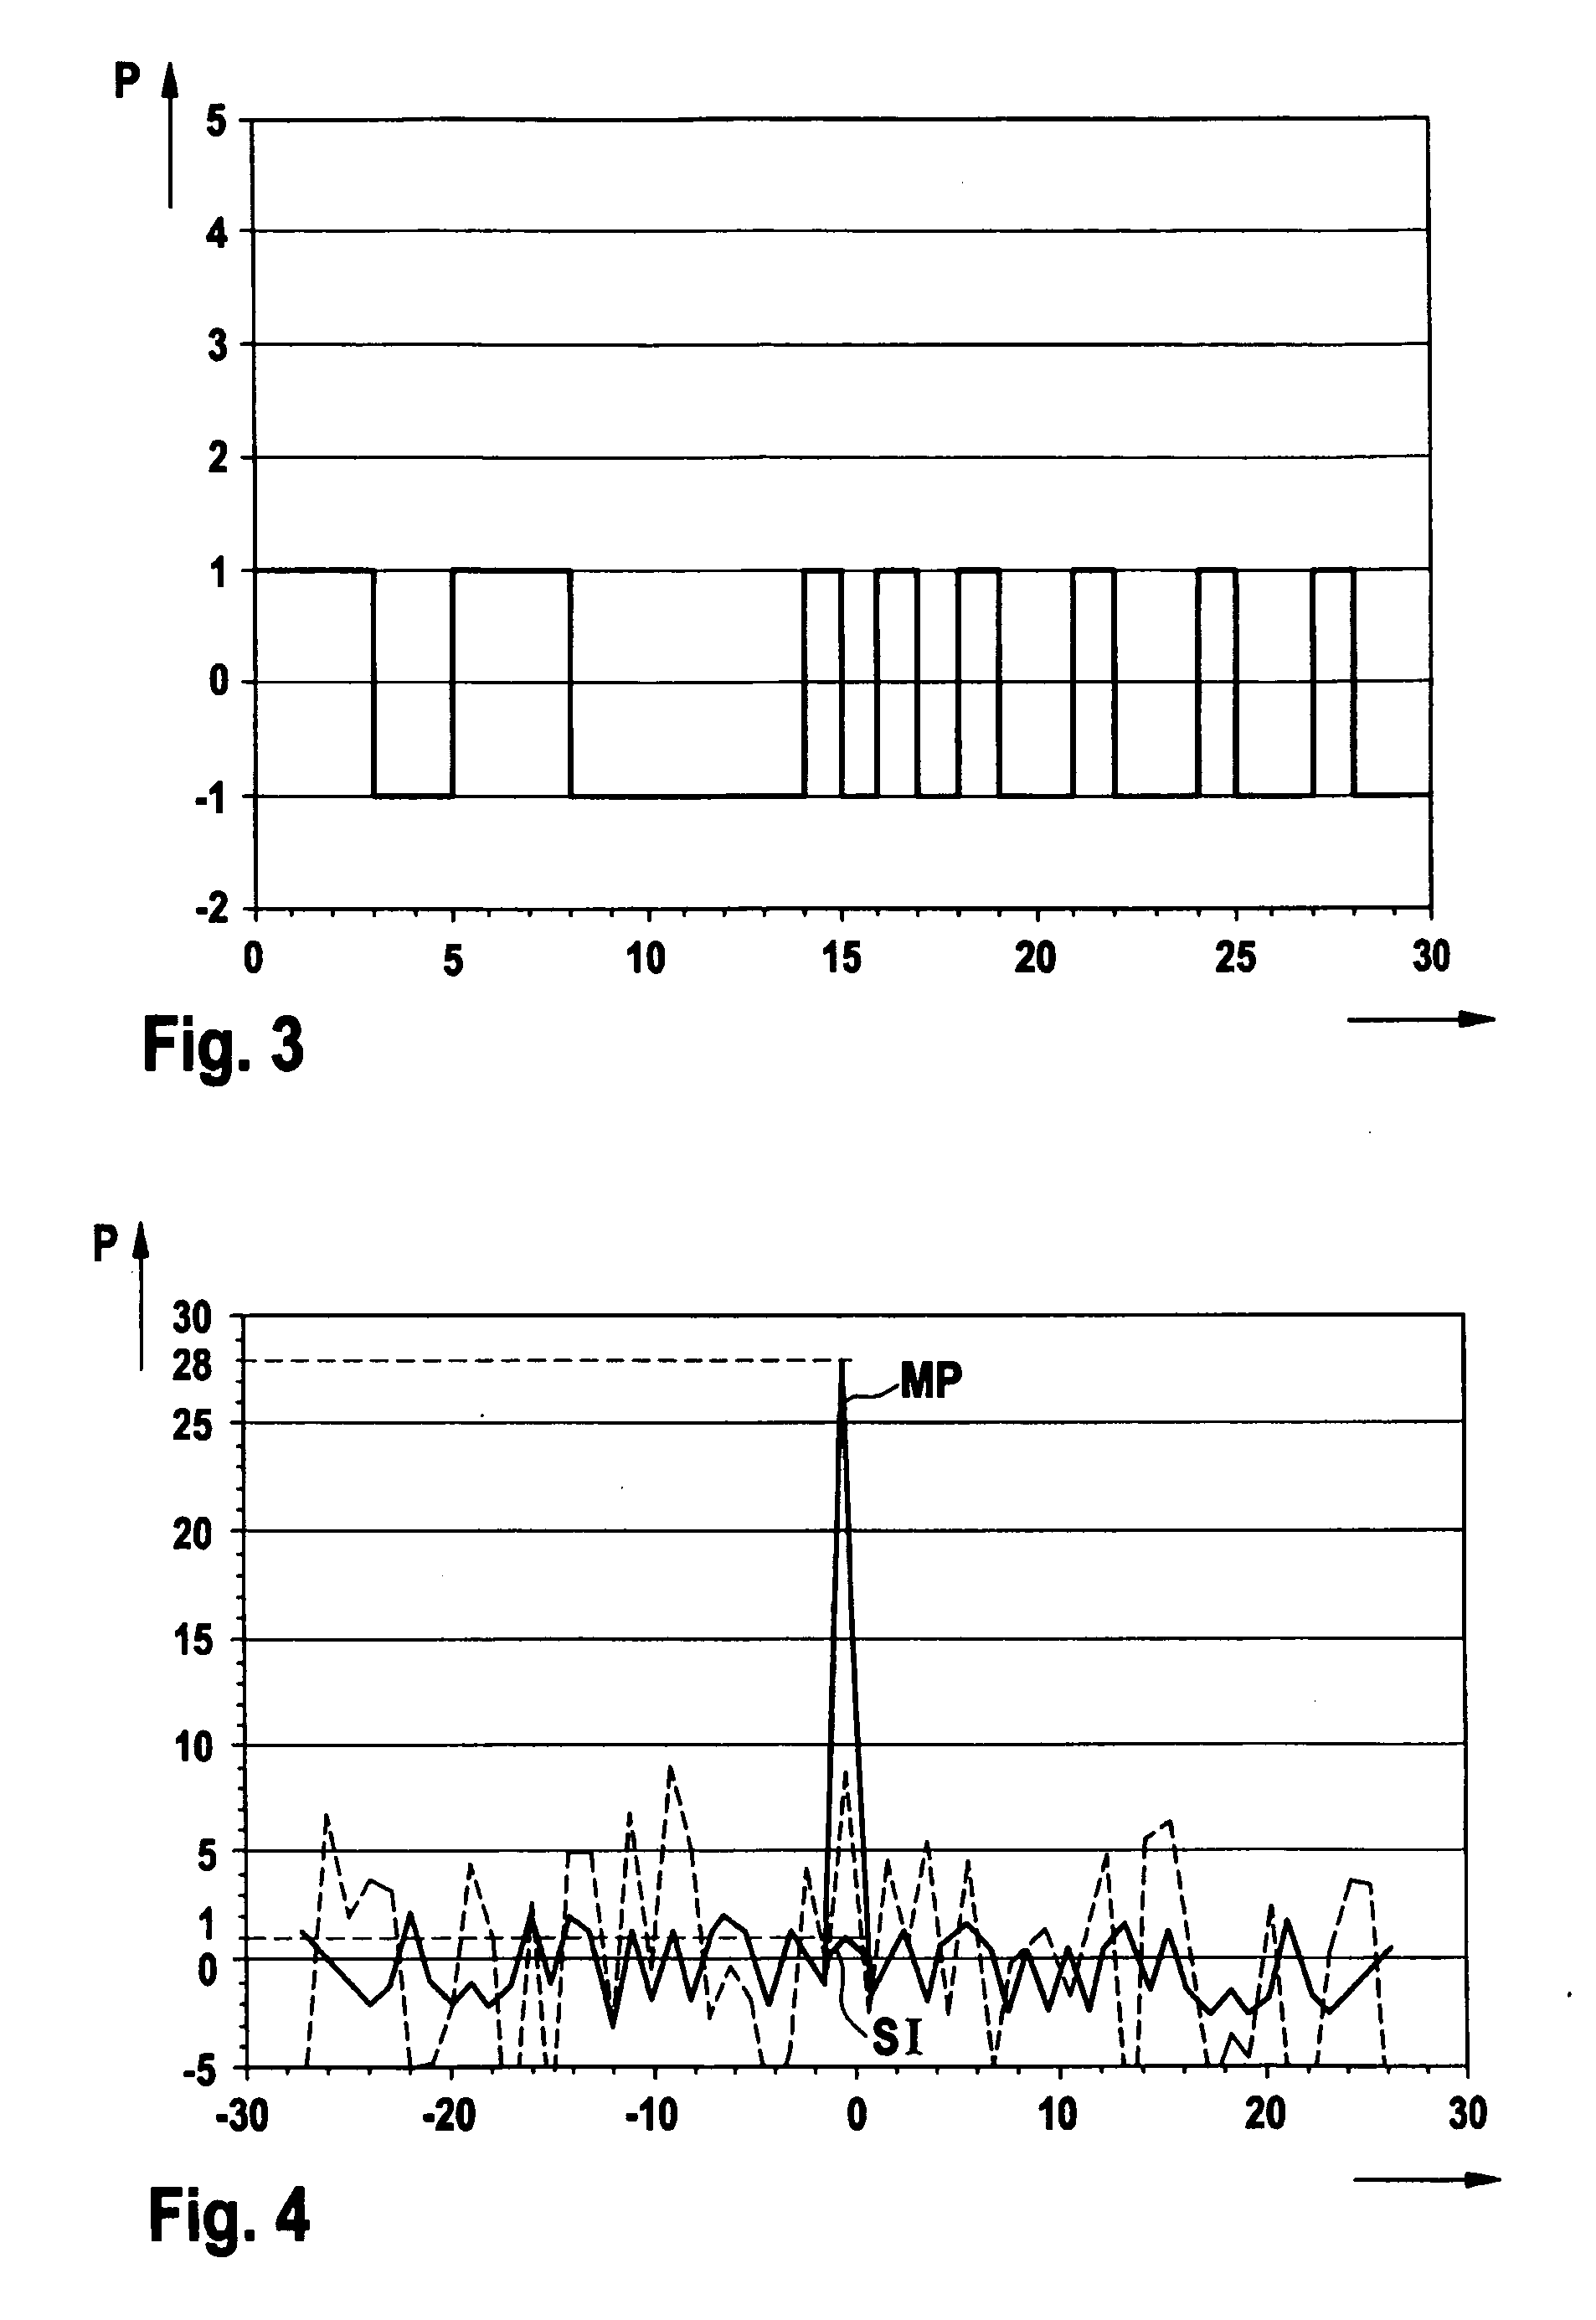 Time-of-flight measurement using pulse sequences